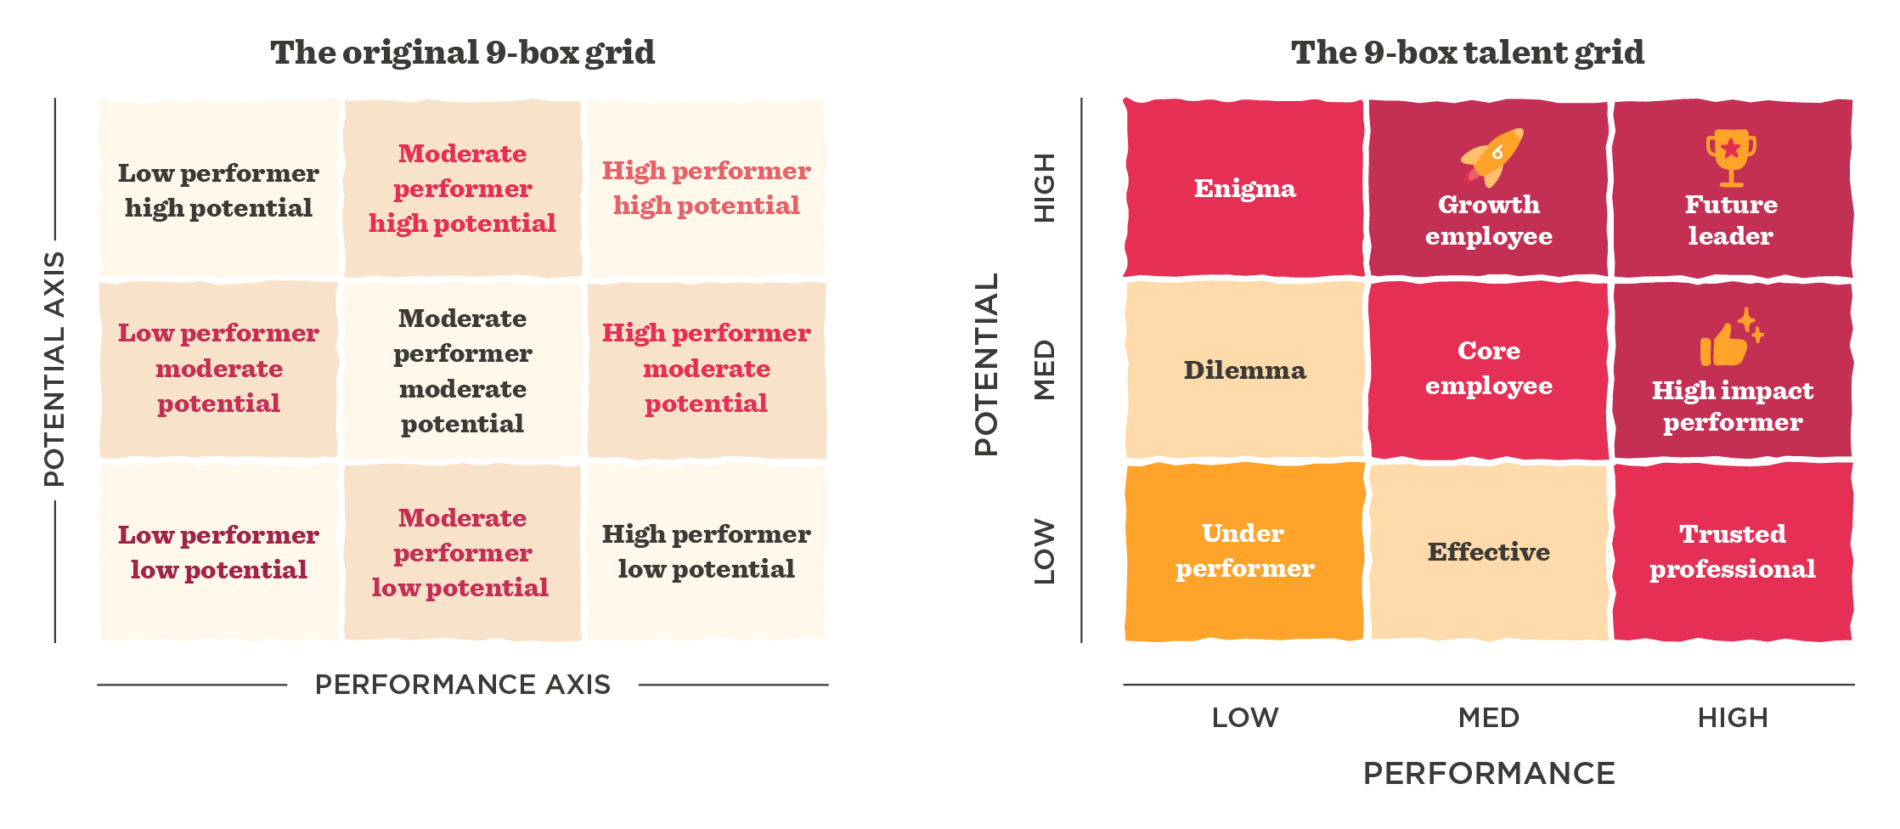 How to use performance mapping as part of your performance management program - 9-box-grid-1-1900x829.png